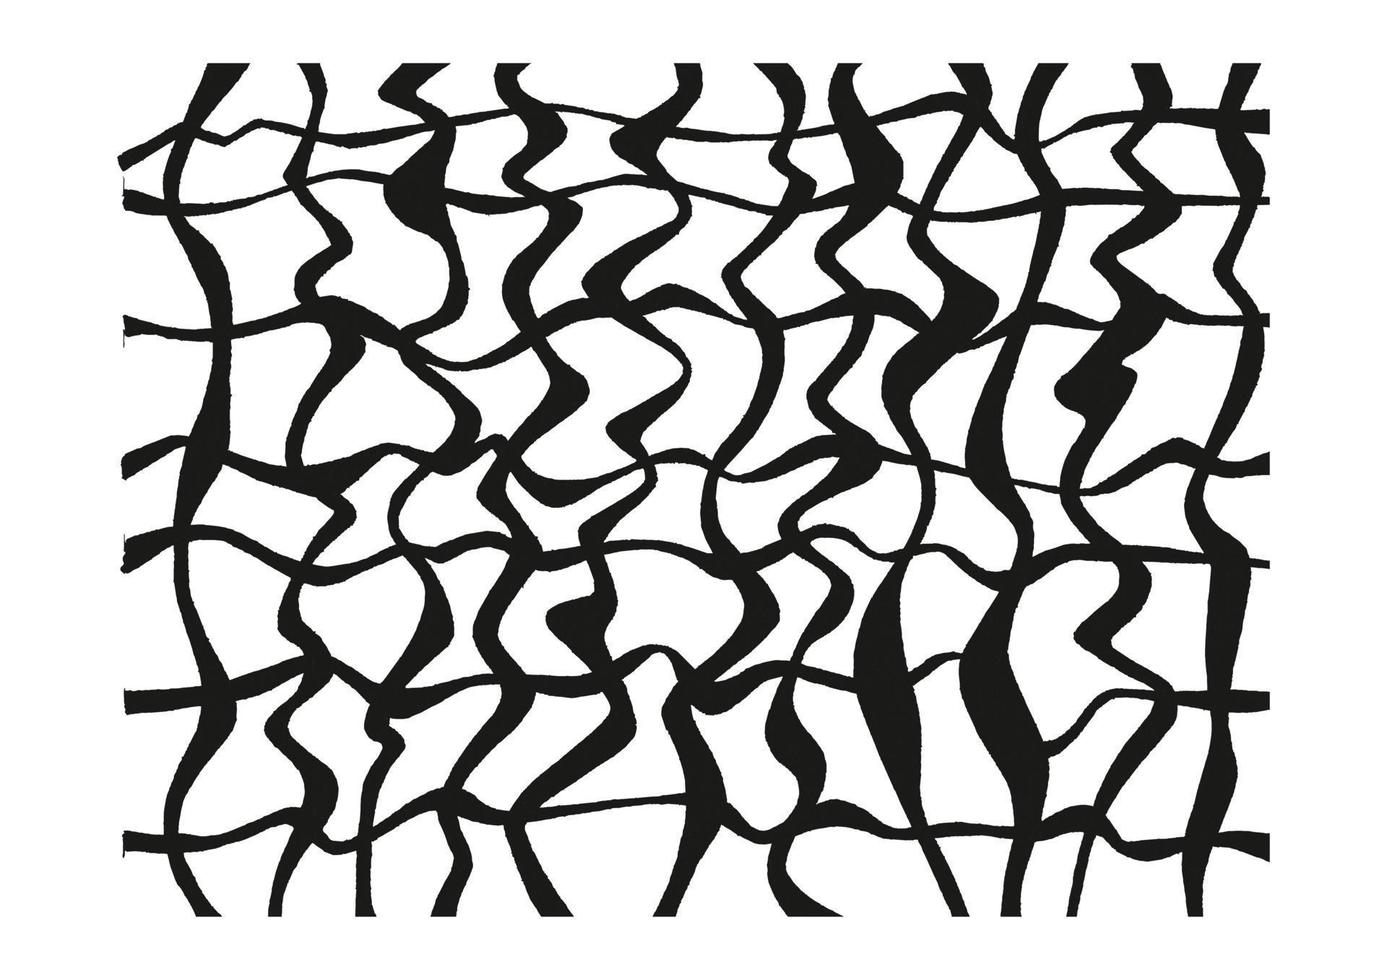 Black mesh wave lines art. Black and white color. vector